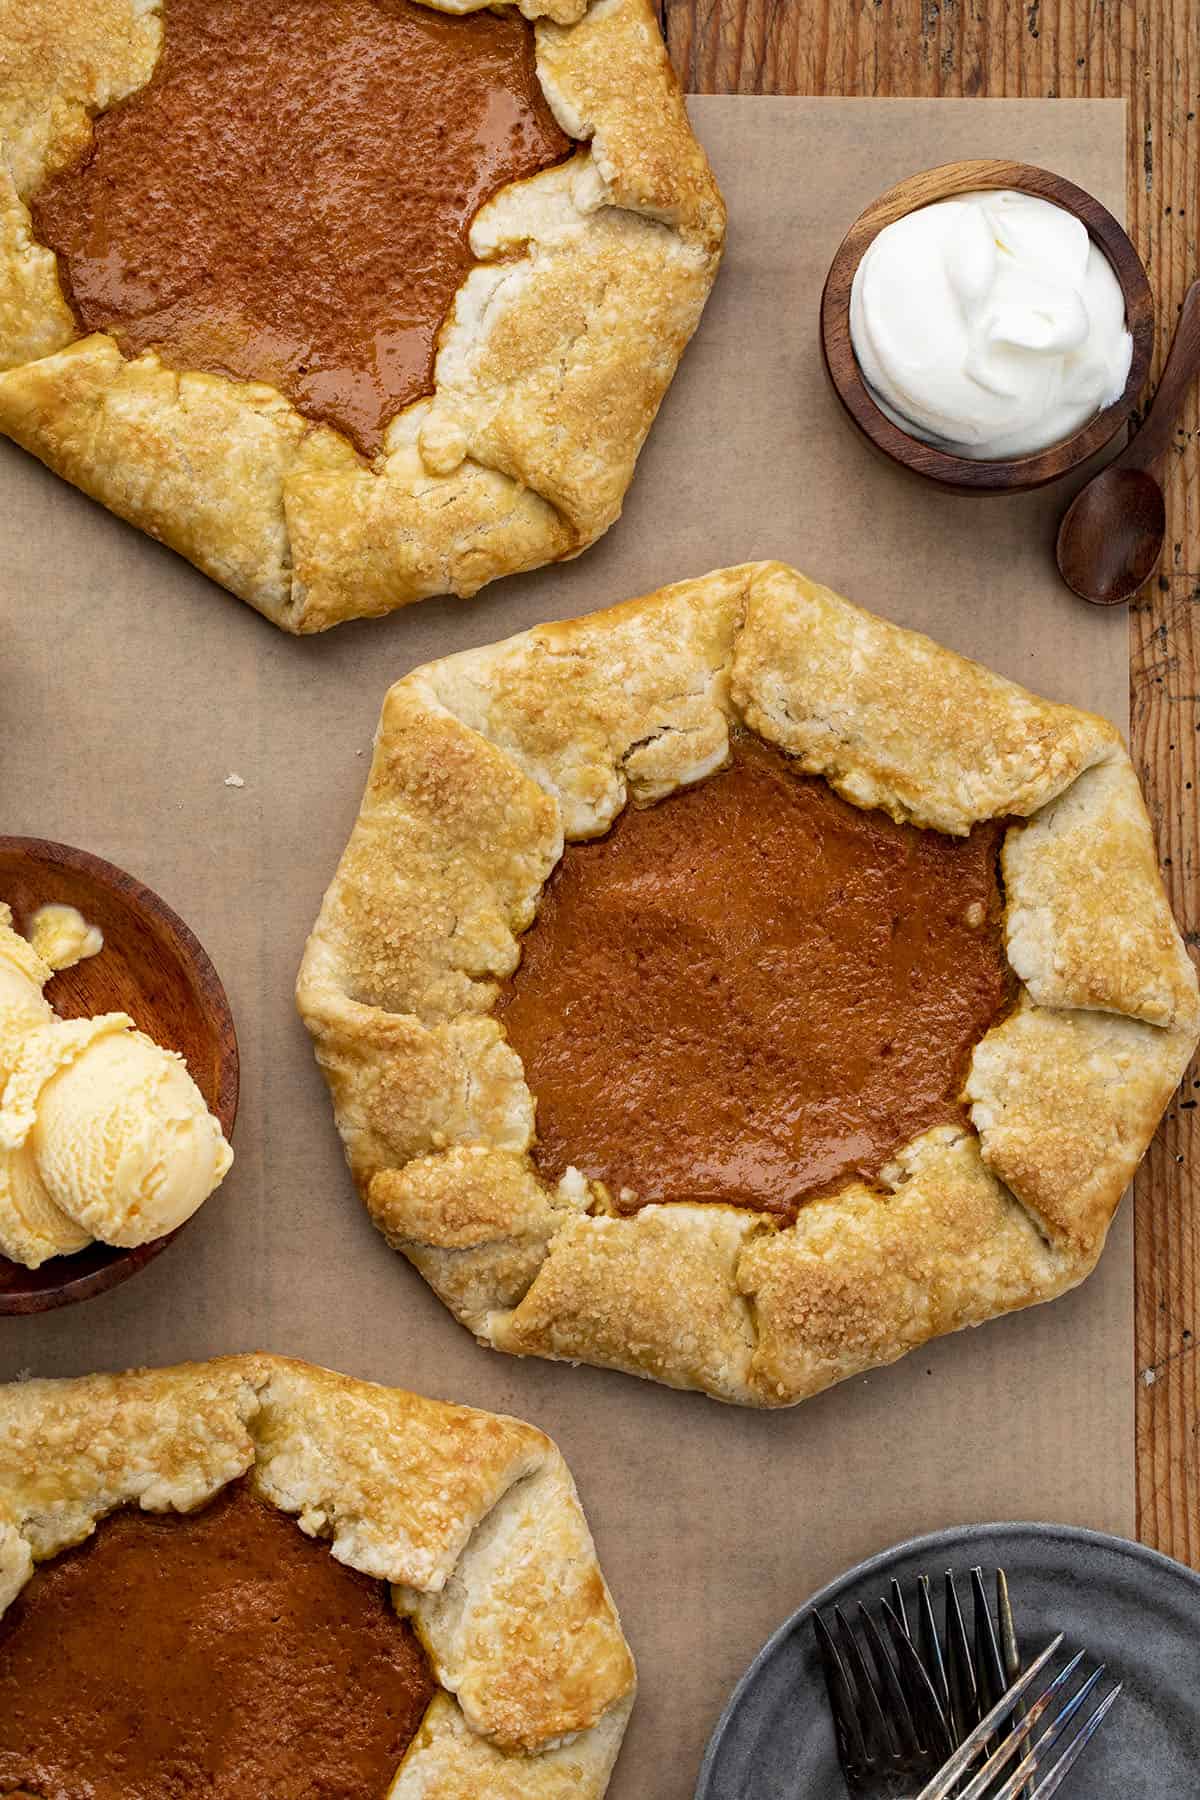 Pumpkin Galettes on a Cutting Board from Overhead with Ice Cream and Whipped Cream. Dessert, Thanksgiving, Pumpkin Pie Galette, Easy Pumpkin Dessert, How to Make Pumpkin Galette, Holiday Desserts, Easy Dessert, Pie Crust, Galette, i am baker, iambaker